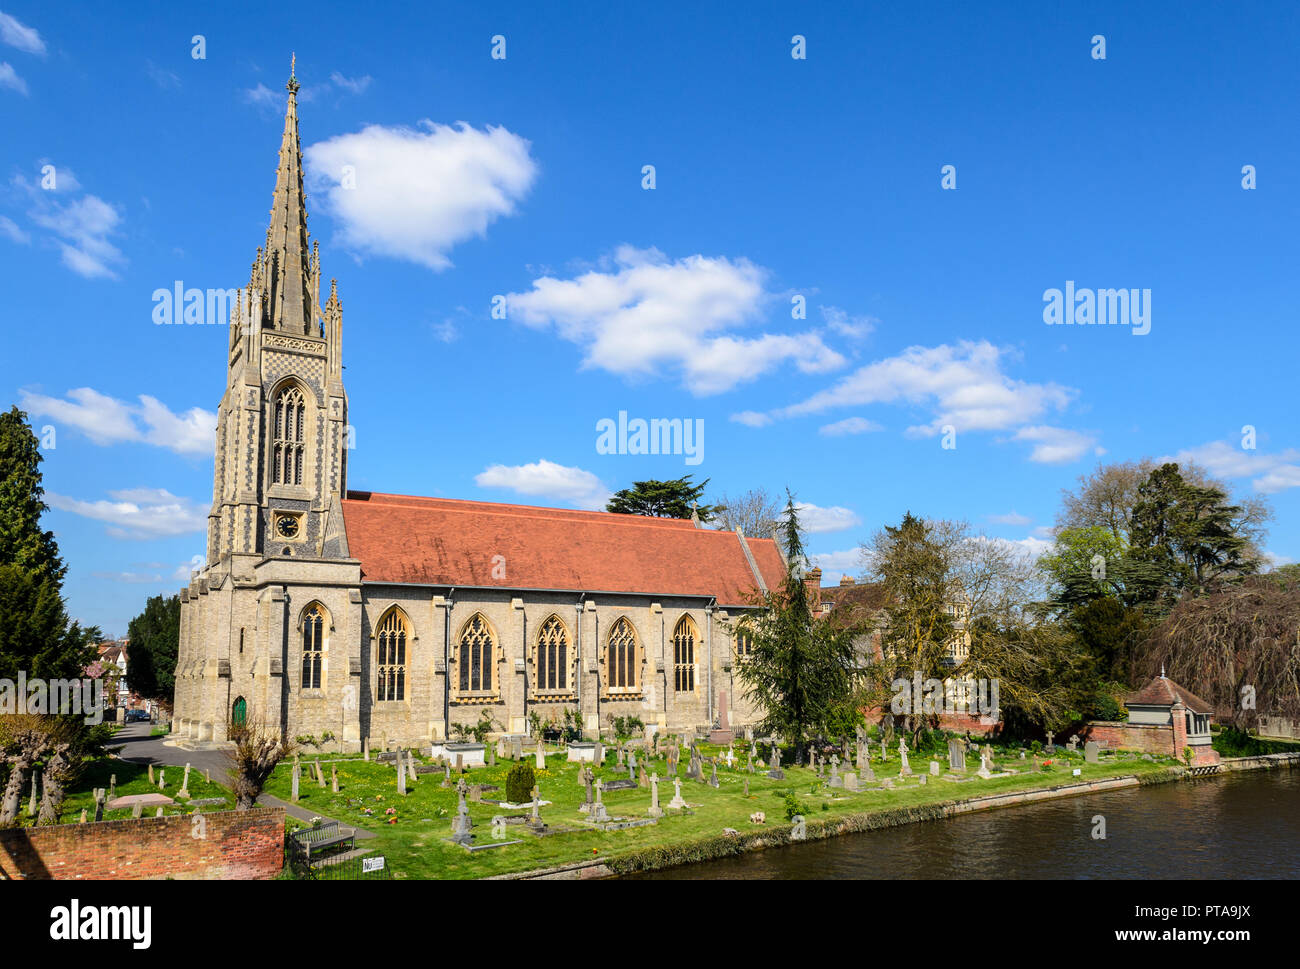 Marlow, England, UK - April 18, 2015: The traditional gothic parish church of All Saints stands on the banks of the River Thames at Marlow in England' Stock Photo